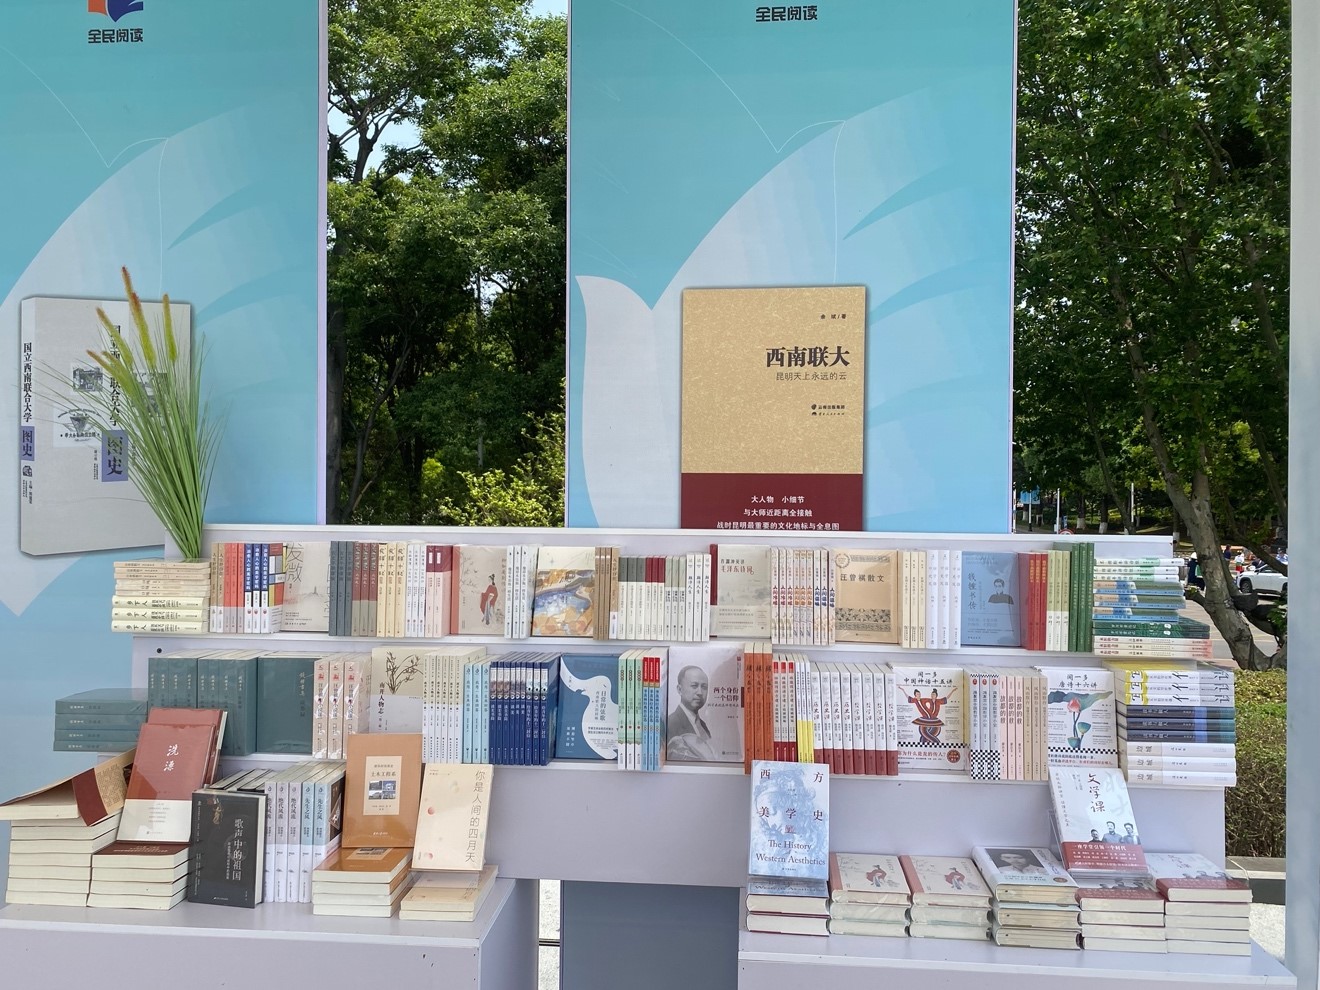 Various books are displayed near the venue hosting the conference. /CGTN